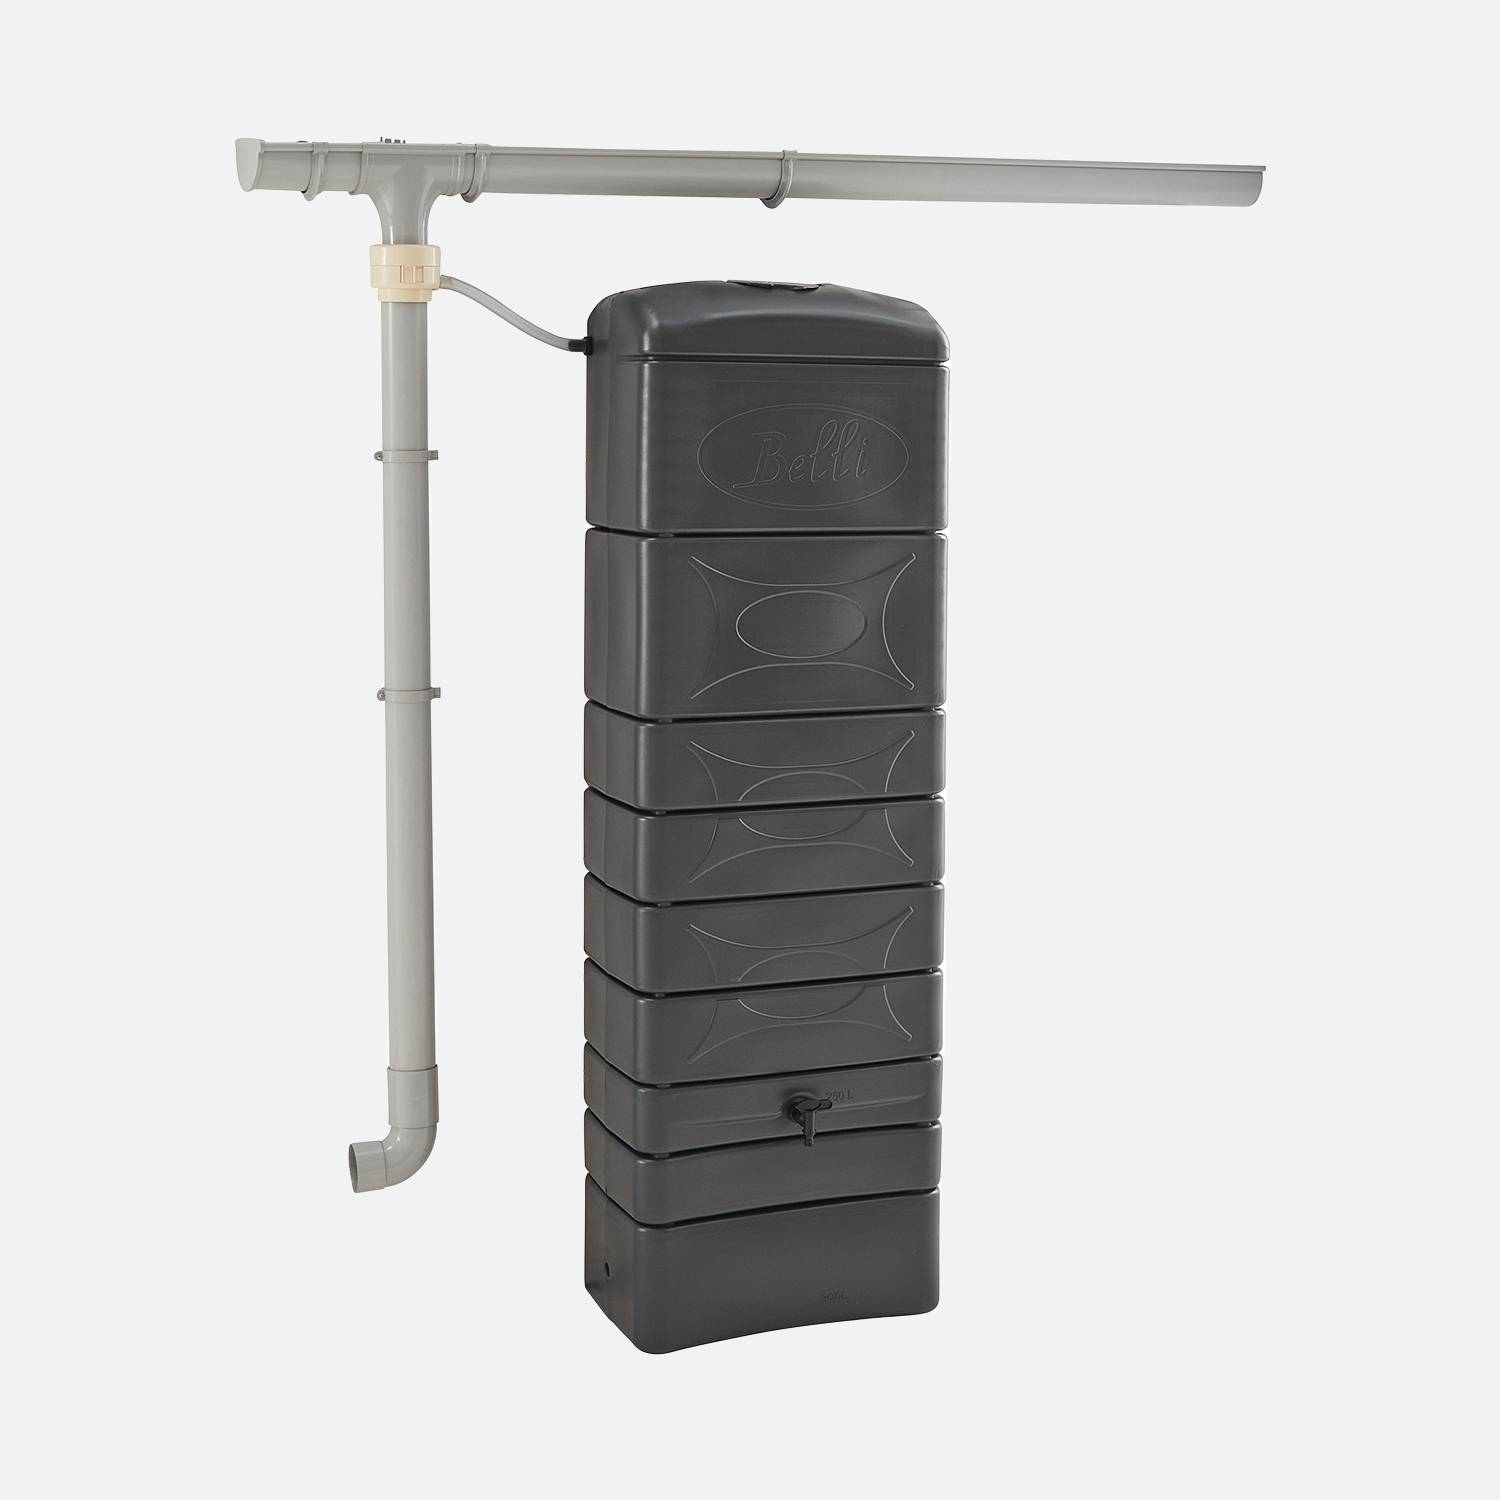 Chastang 300L Anthracite wall-mounted water collector with gutter connection kit included,sweeek,Photo2